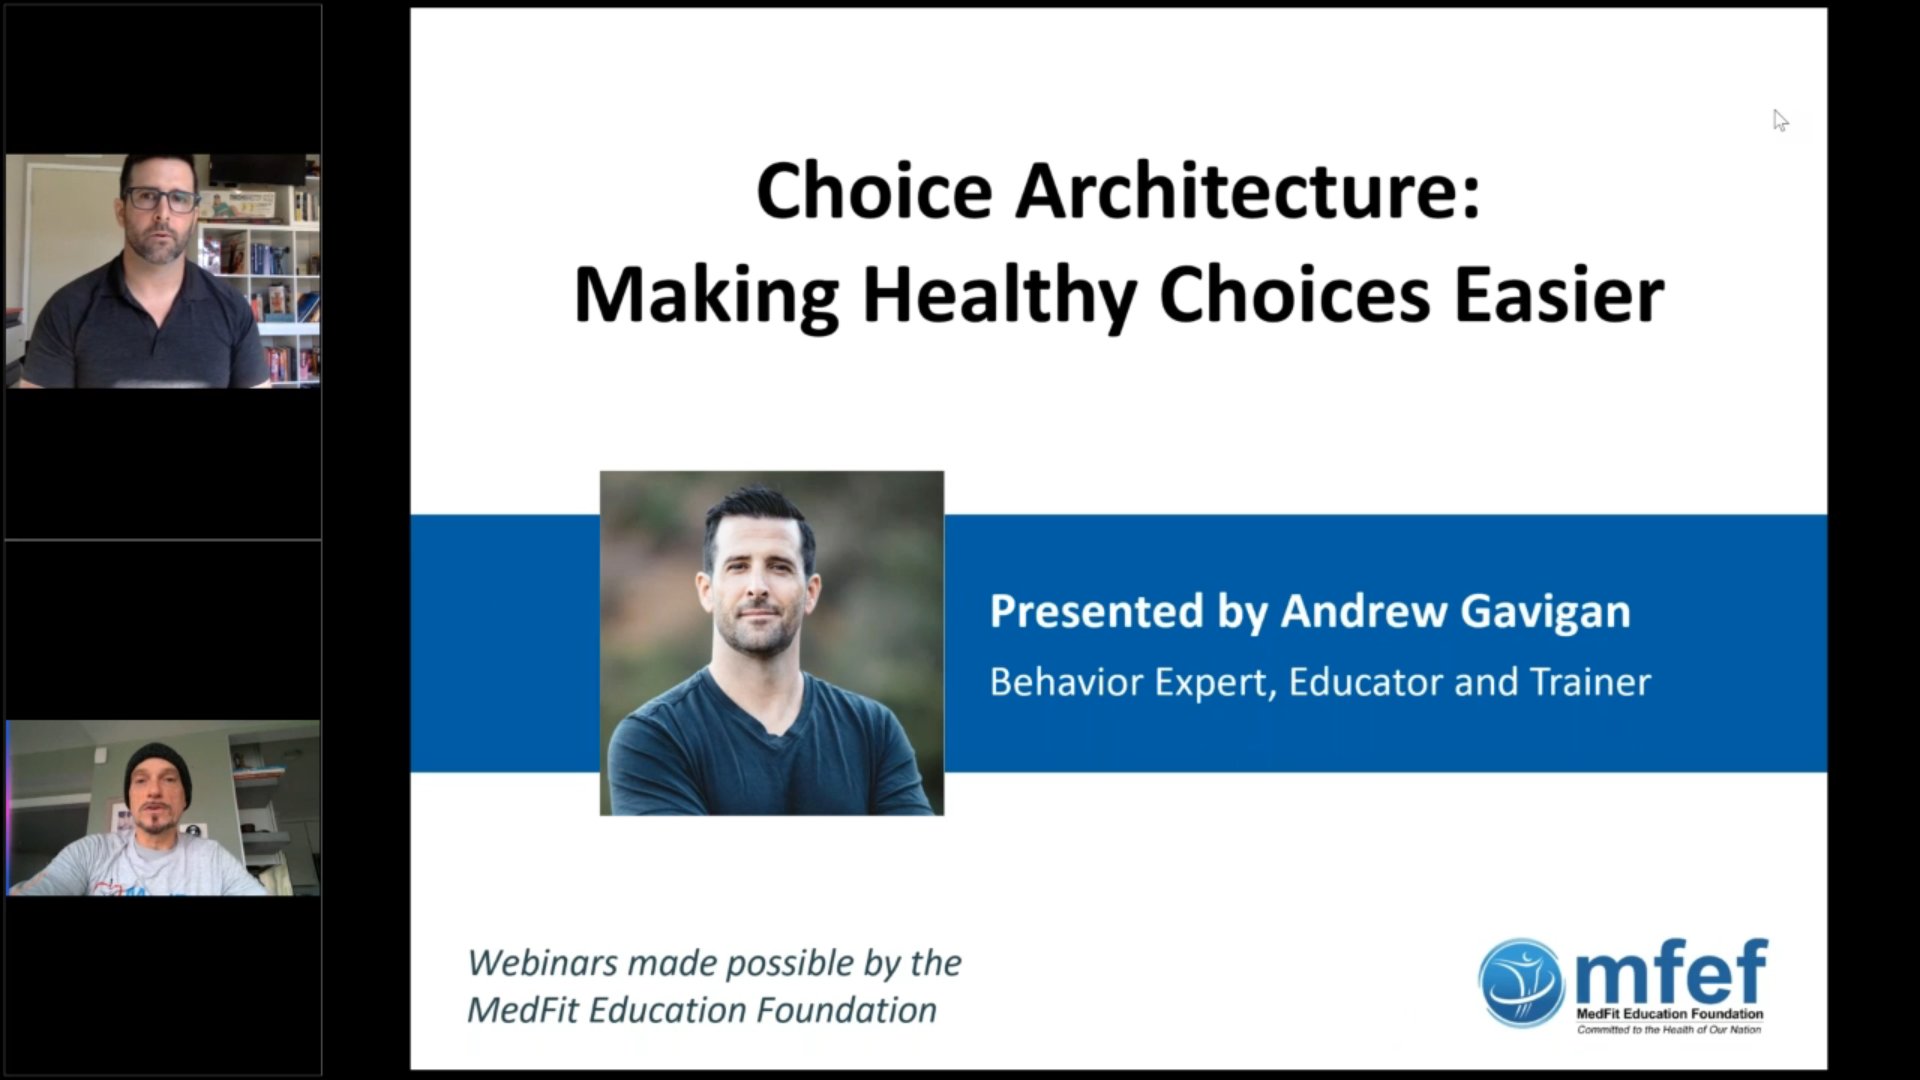 Choice Architecture: Making Healthy Choices Easier